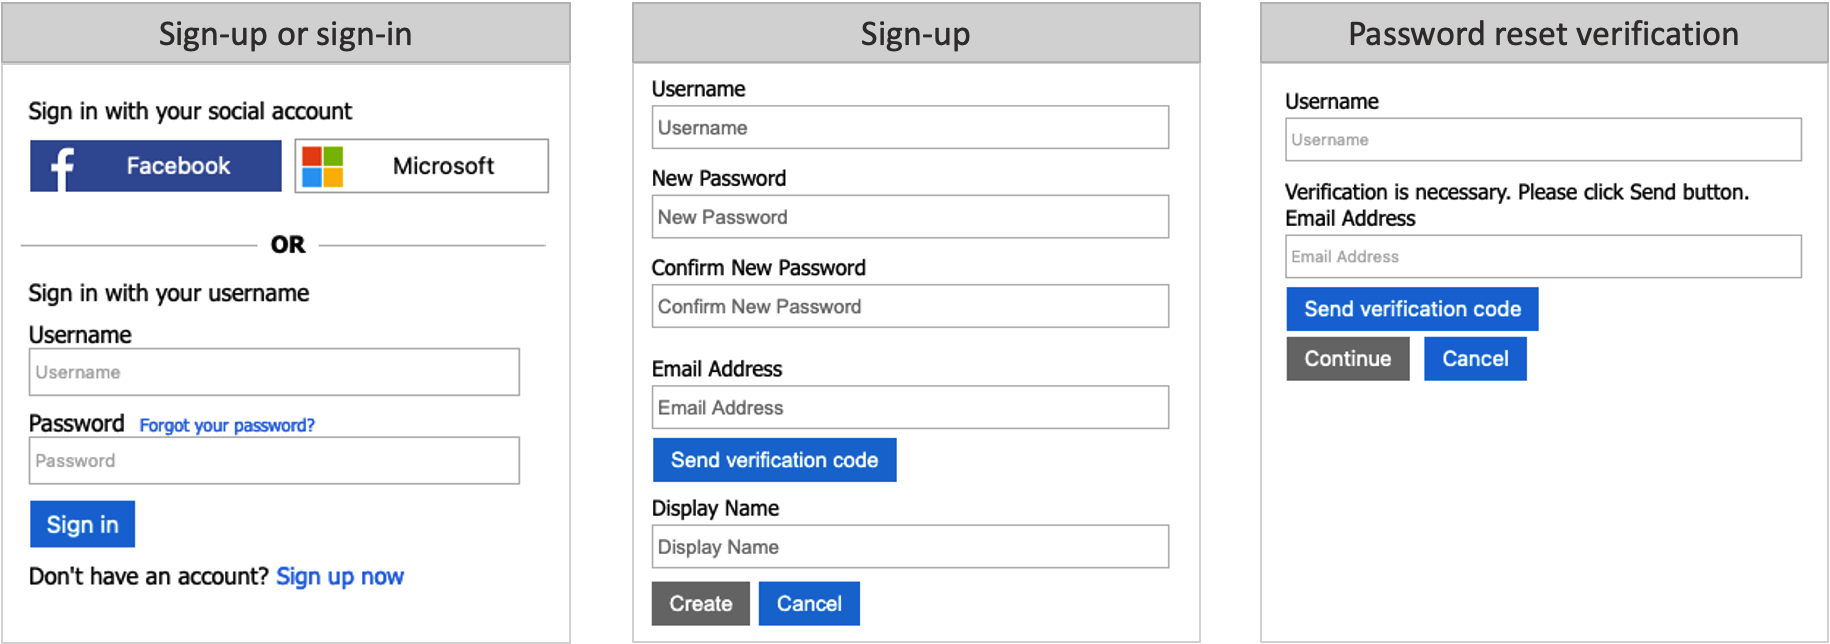 Series of screenshots showing sign-up or sign-in experience.